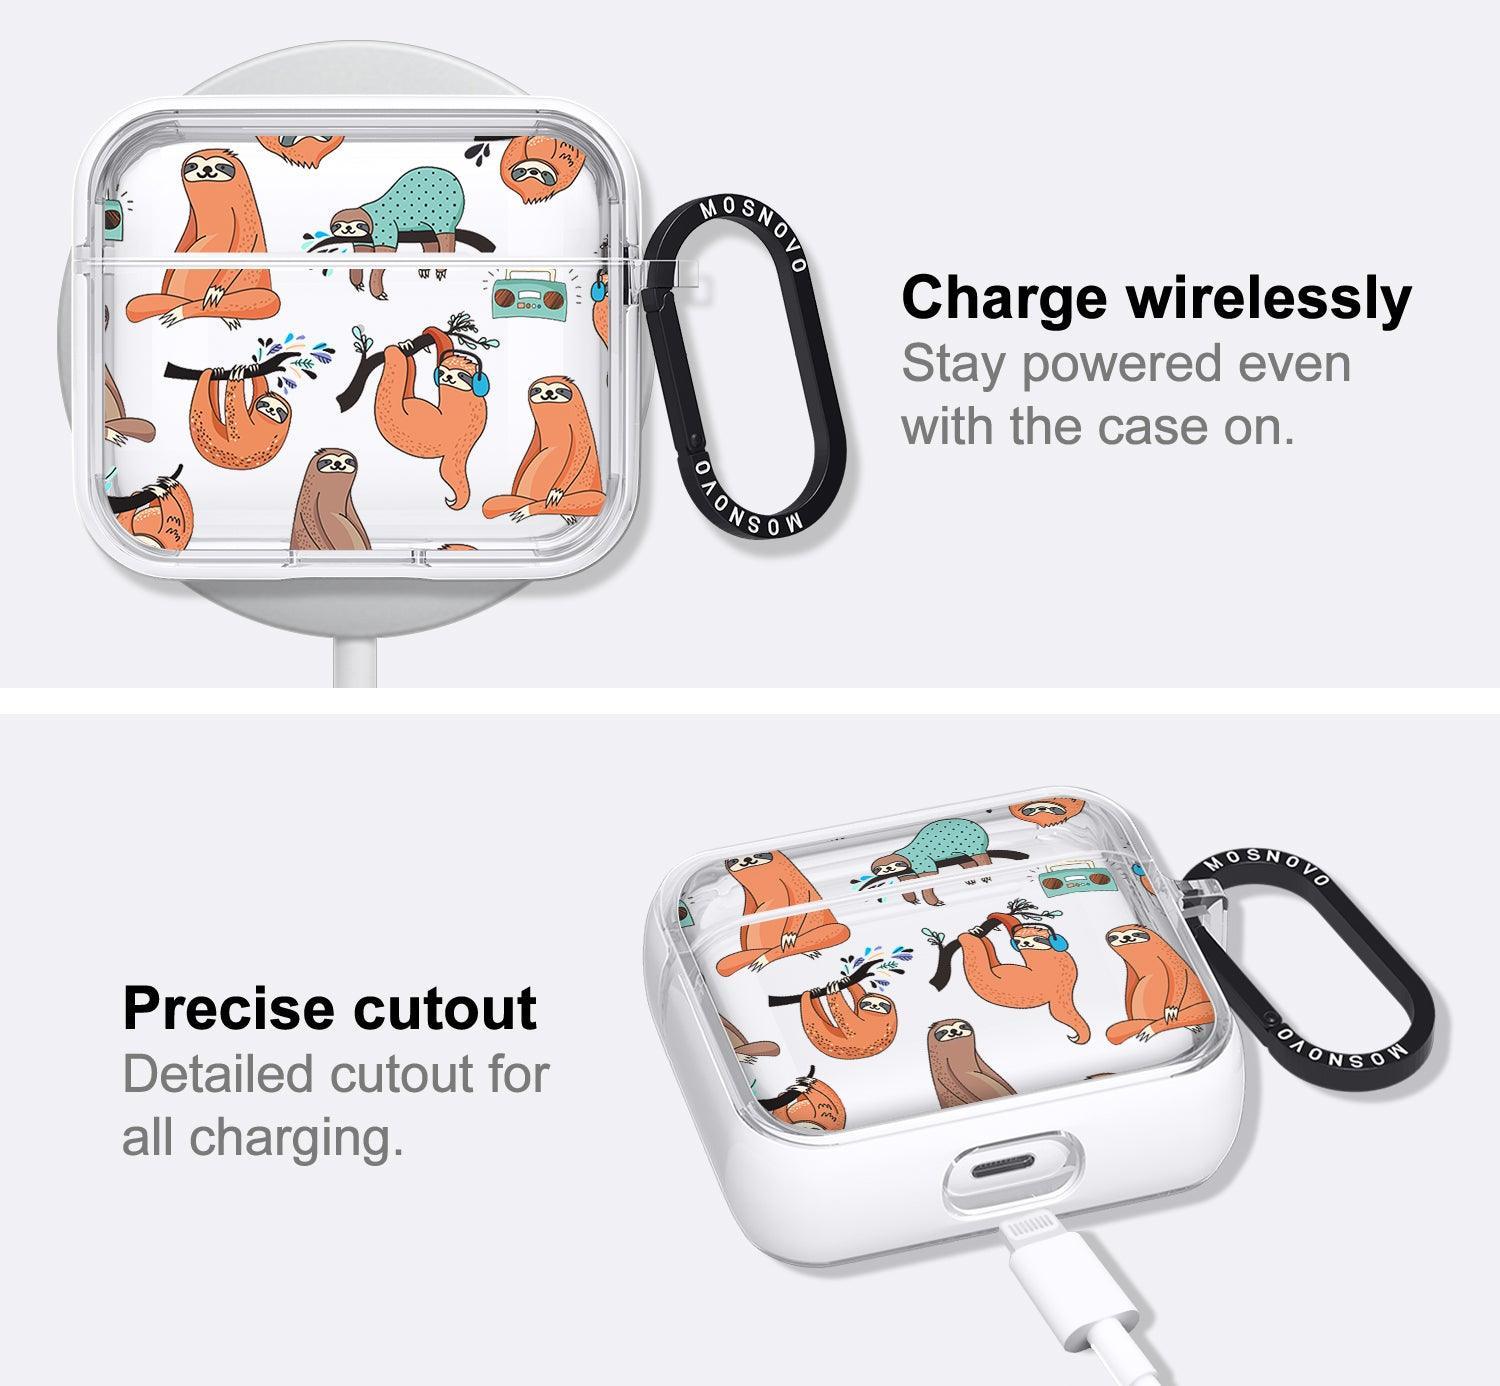 Sloth AirPods 3 Case (3rd Generation) - MOSNOVO